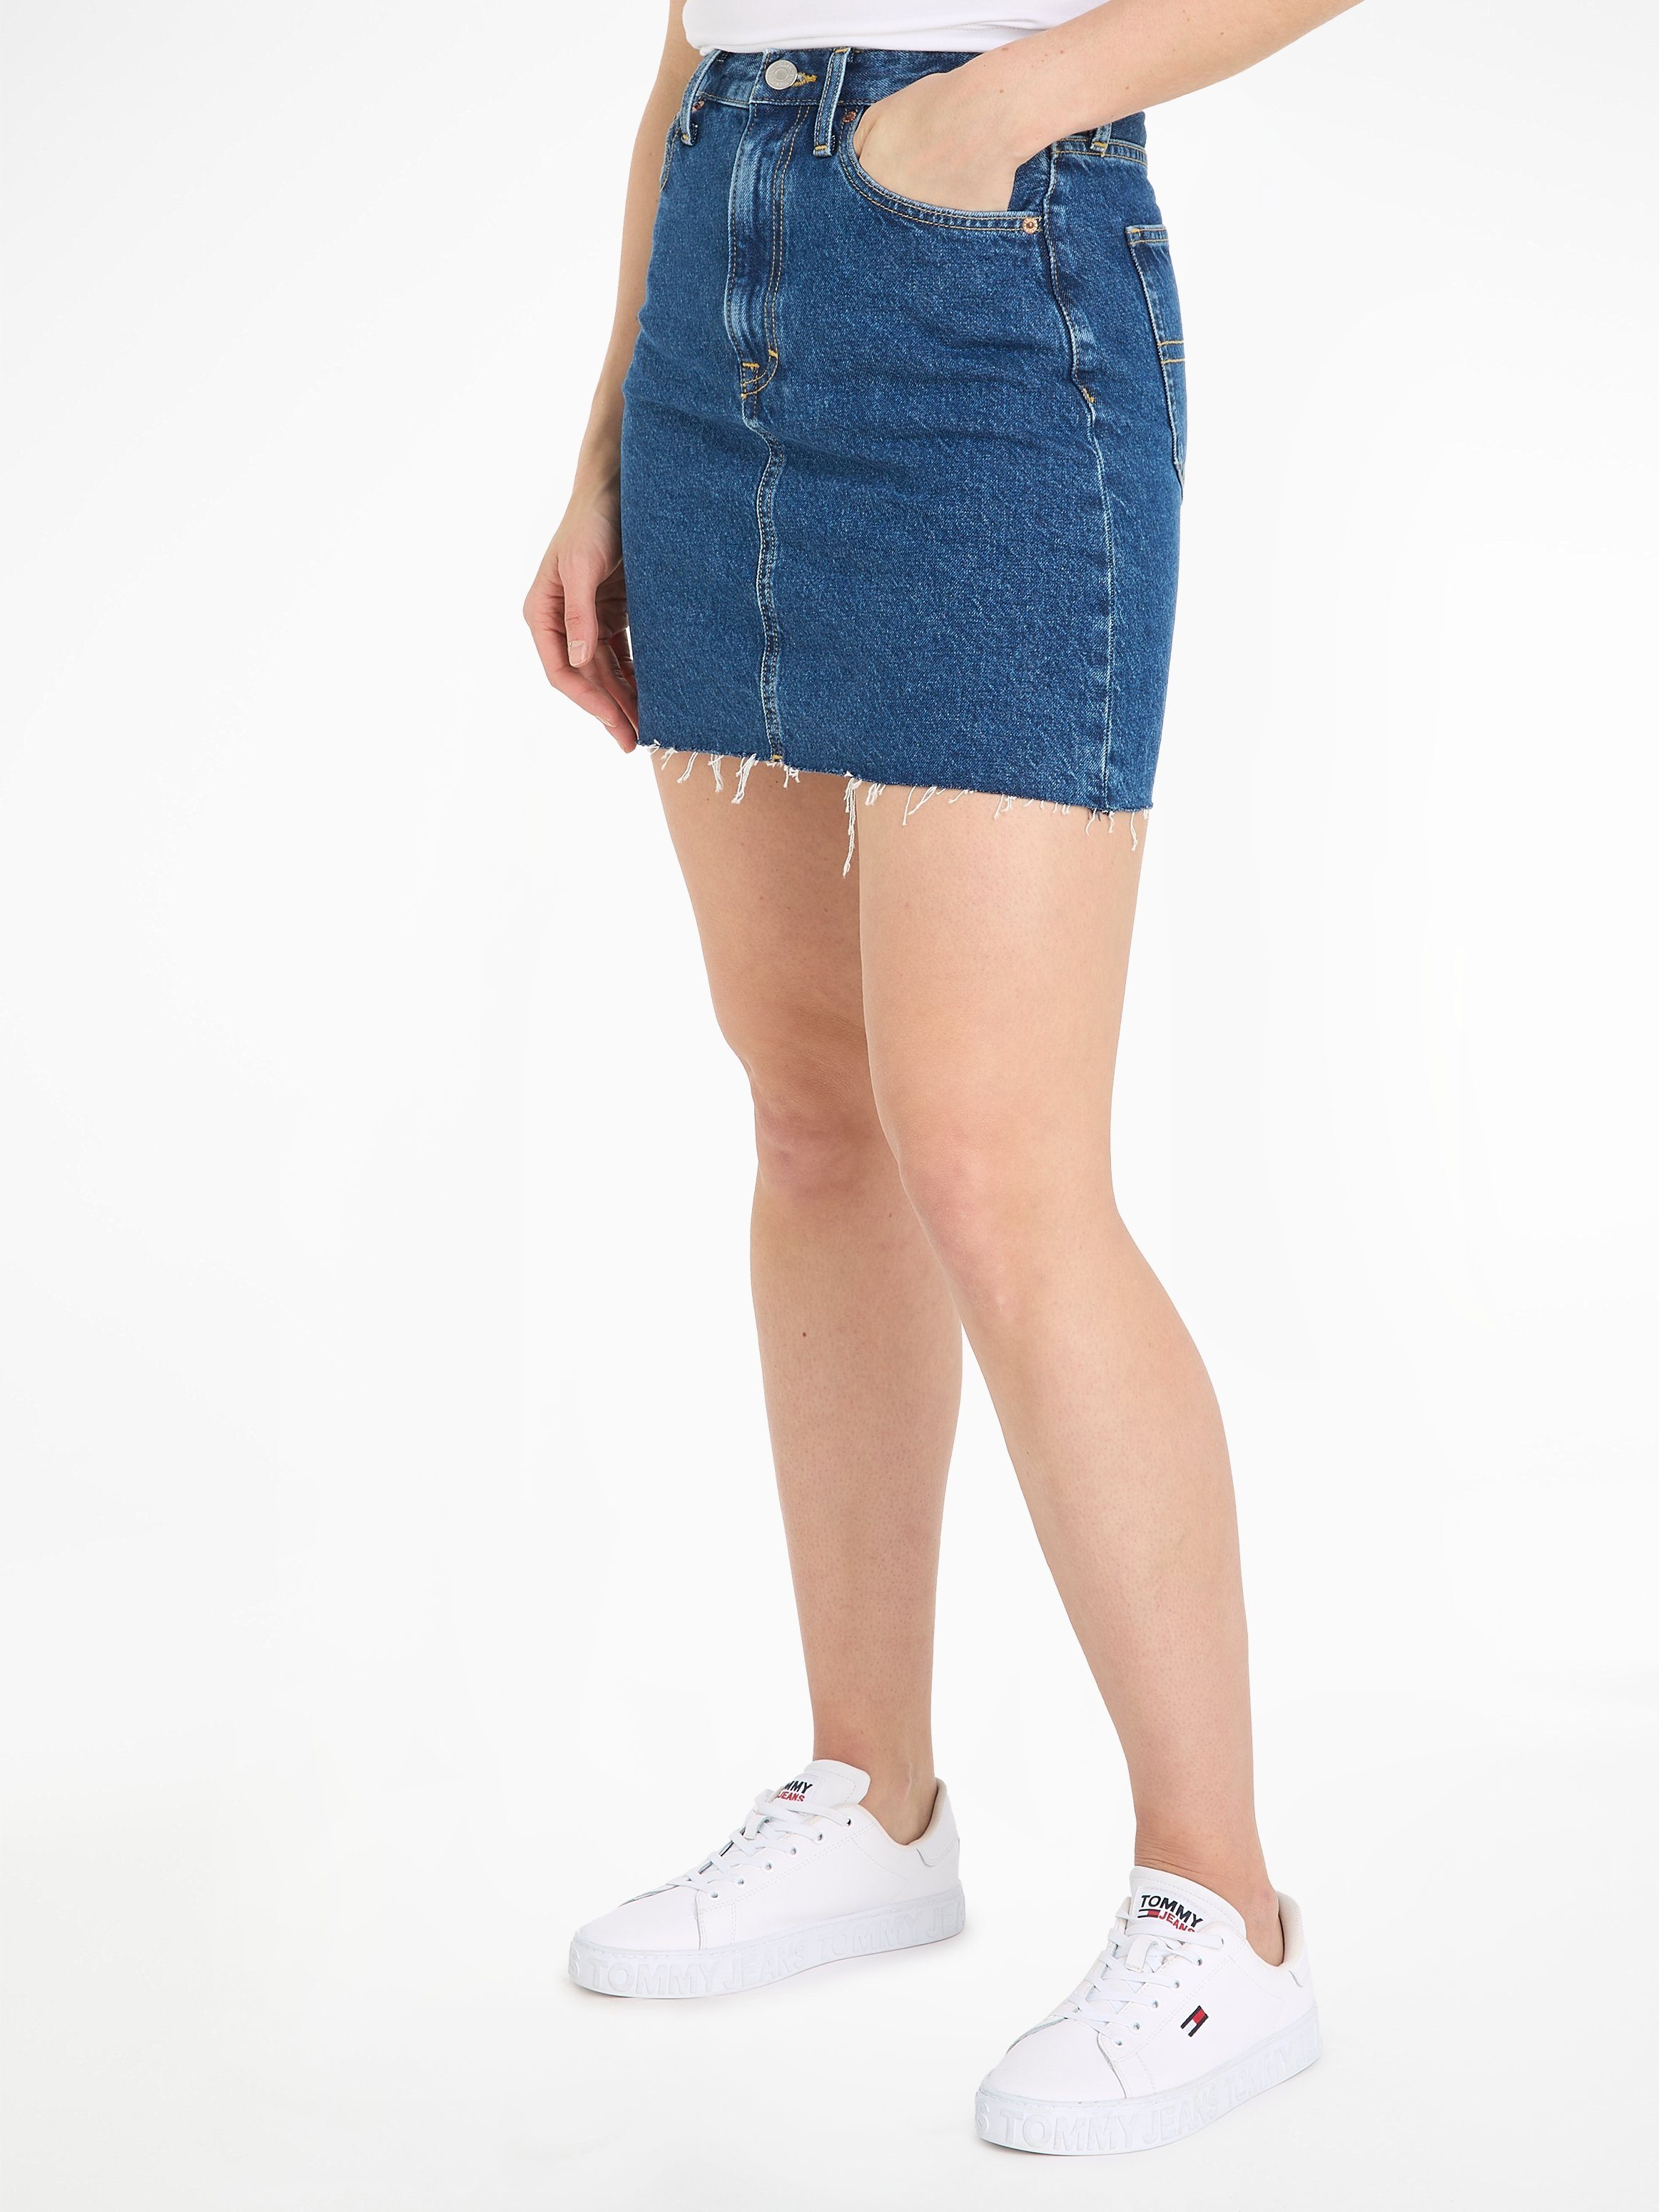 Jeansrock MOM Jeans Tommy AH4035 UH Logostickerei mit SKIRT